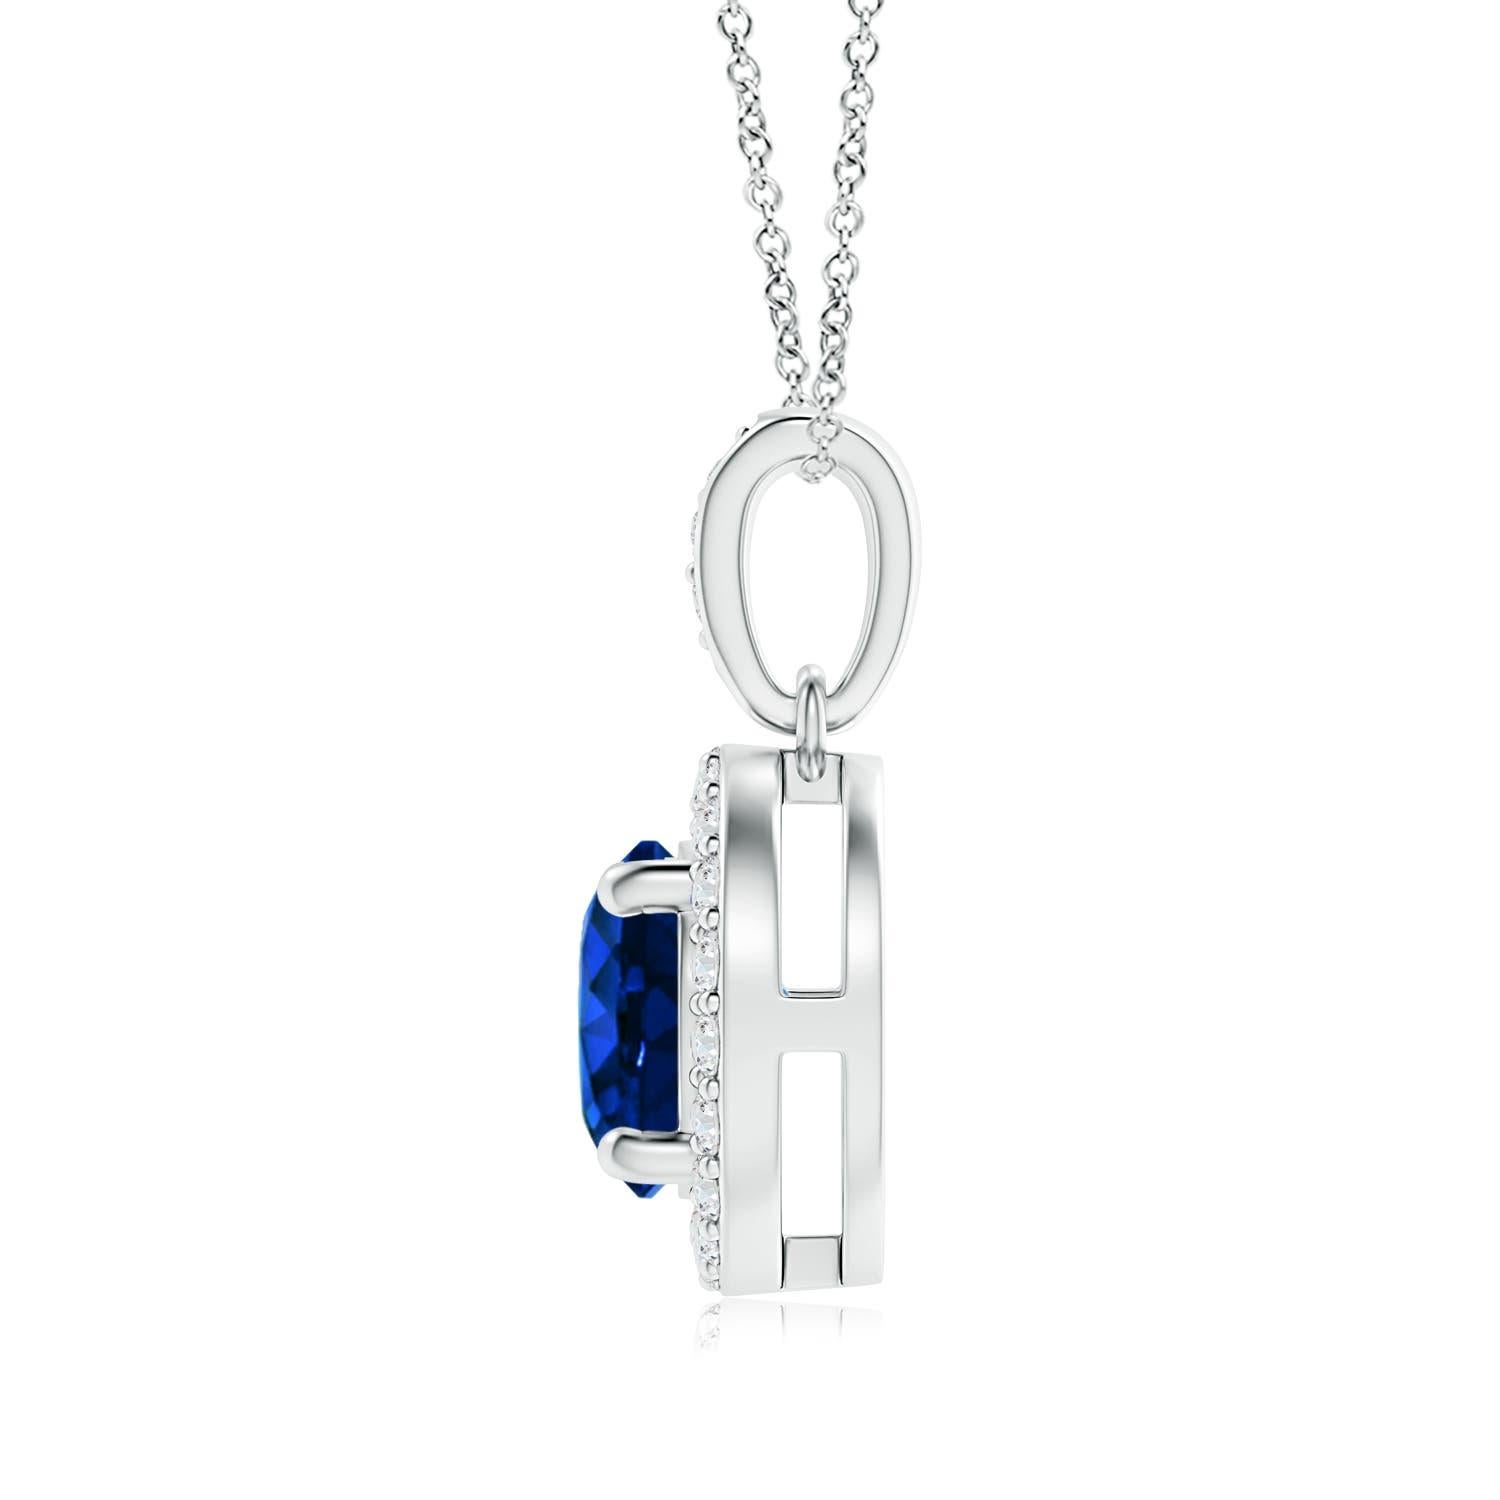 The GIA certified round blue sapphire is held in a prong setting and appears to be floating amid a dazzling diamond halo. There are additional diamond accents on the bale that elevate the elegant look of this 18K White Gold pendant.
